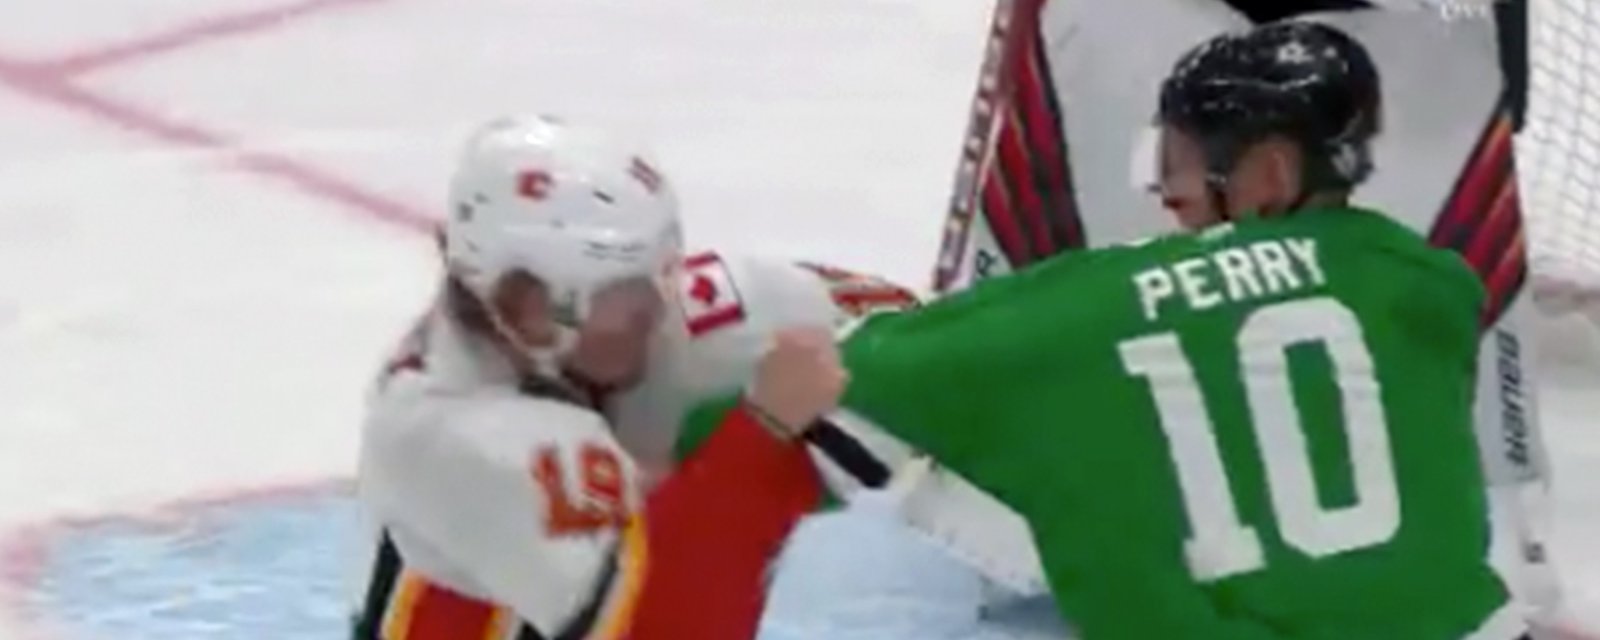 Tkachuk and Perry drop the gloves early in Game 1